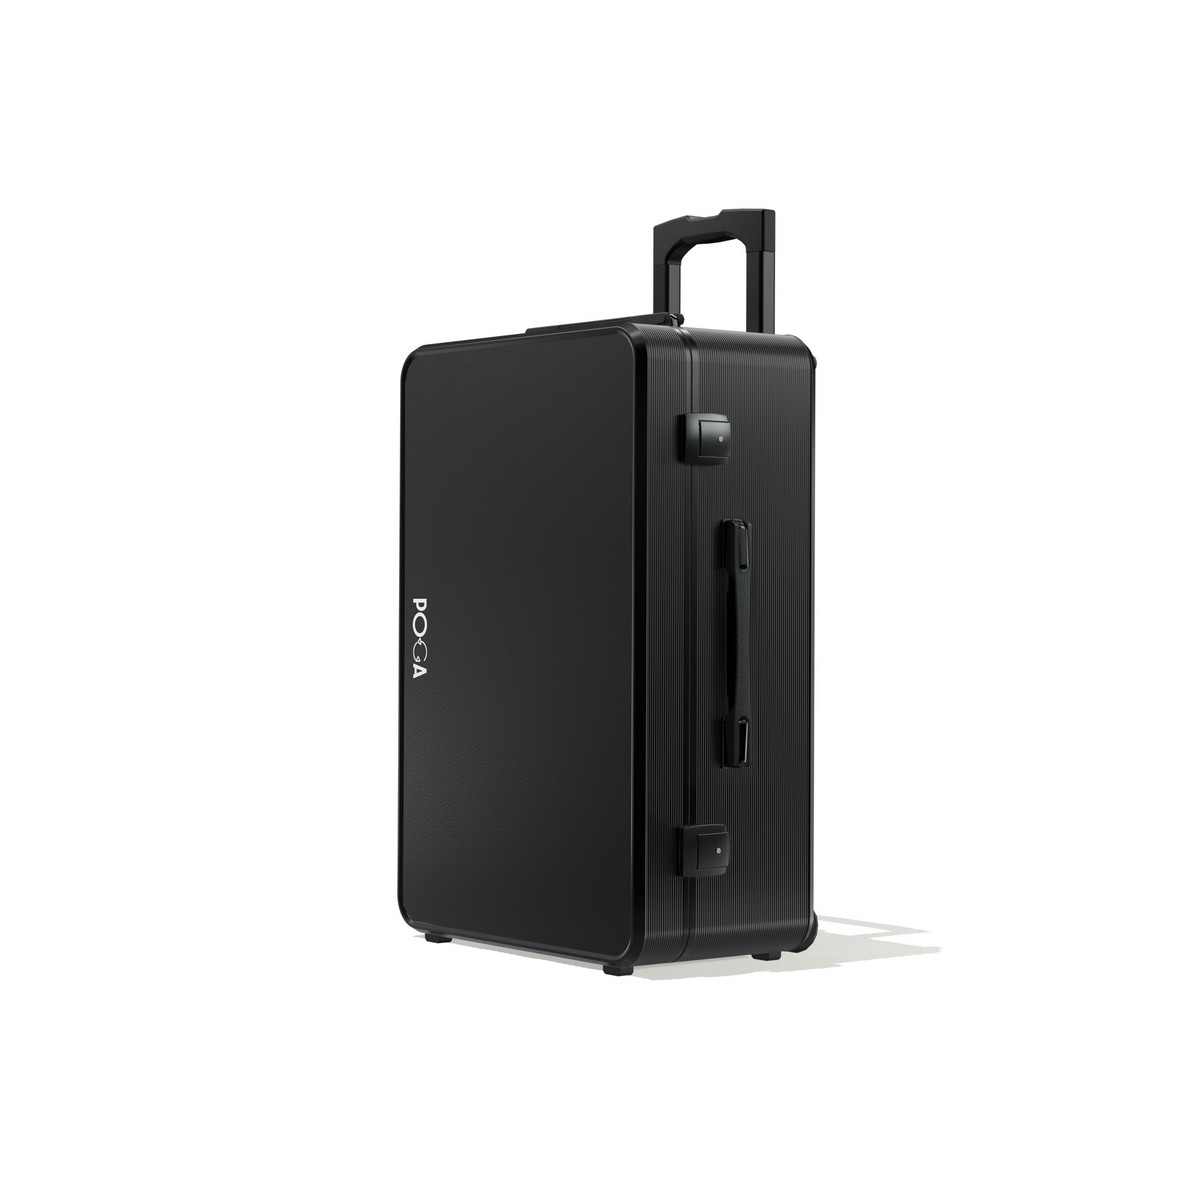 Indi Gaming - SLY Xbox Series X Premium Portable Console Travel Case incl. Trolley and 24‘‘ AOC Gaming Monitor - Black